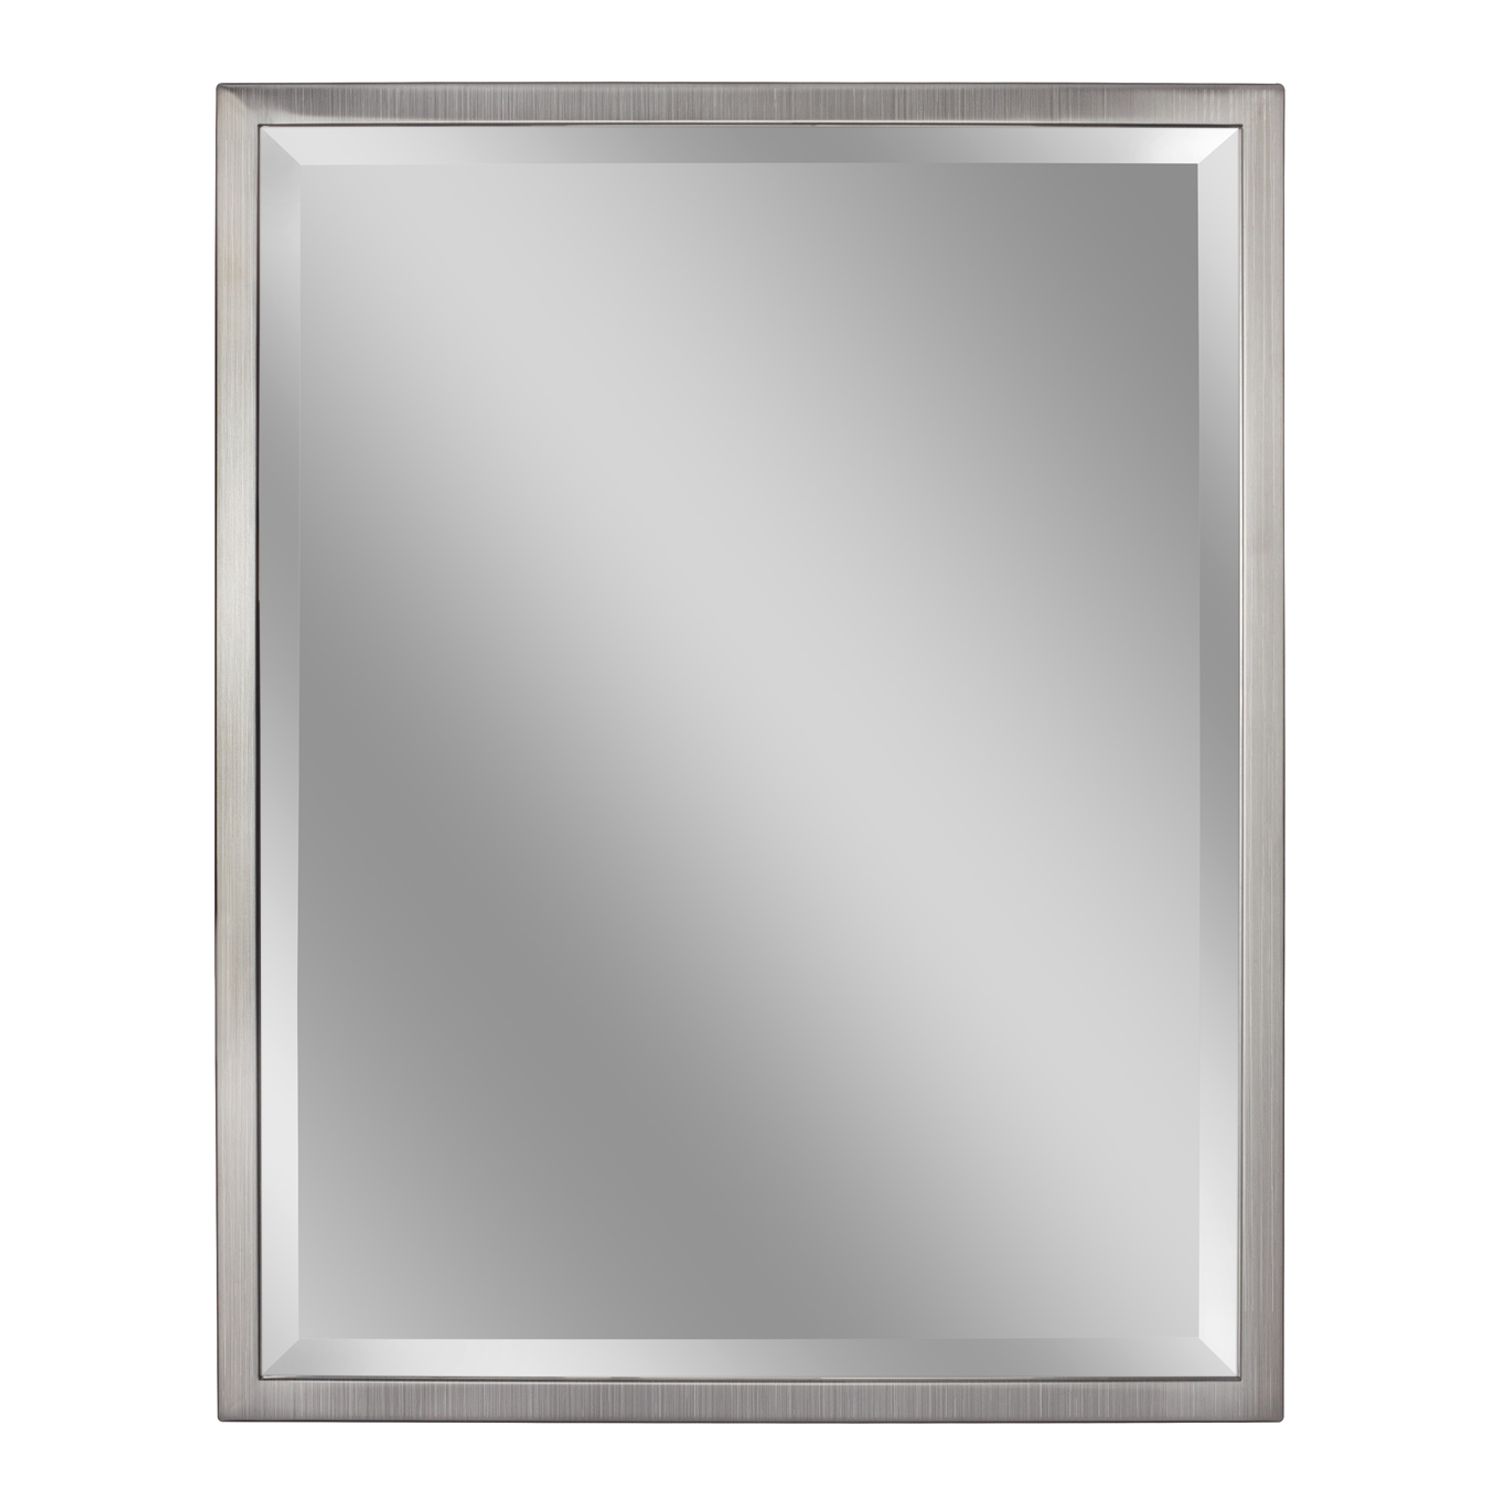 Image for Head West Classic Brush Nickel Wall Mirror at Kohl's.